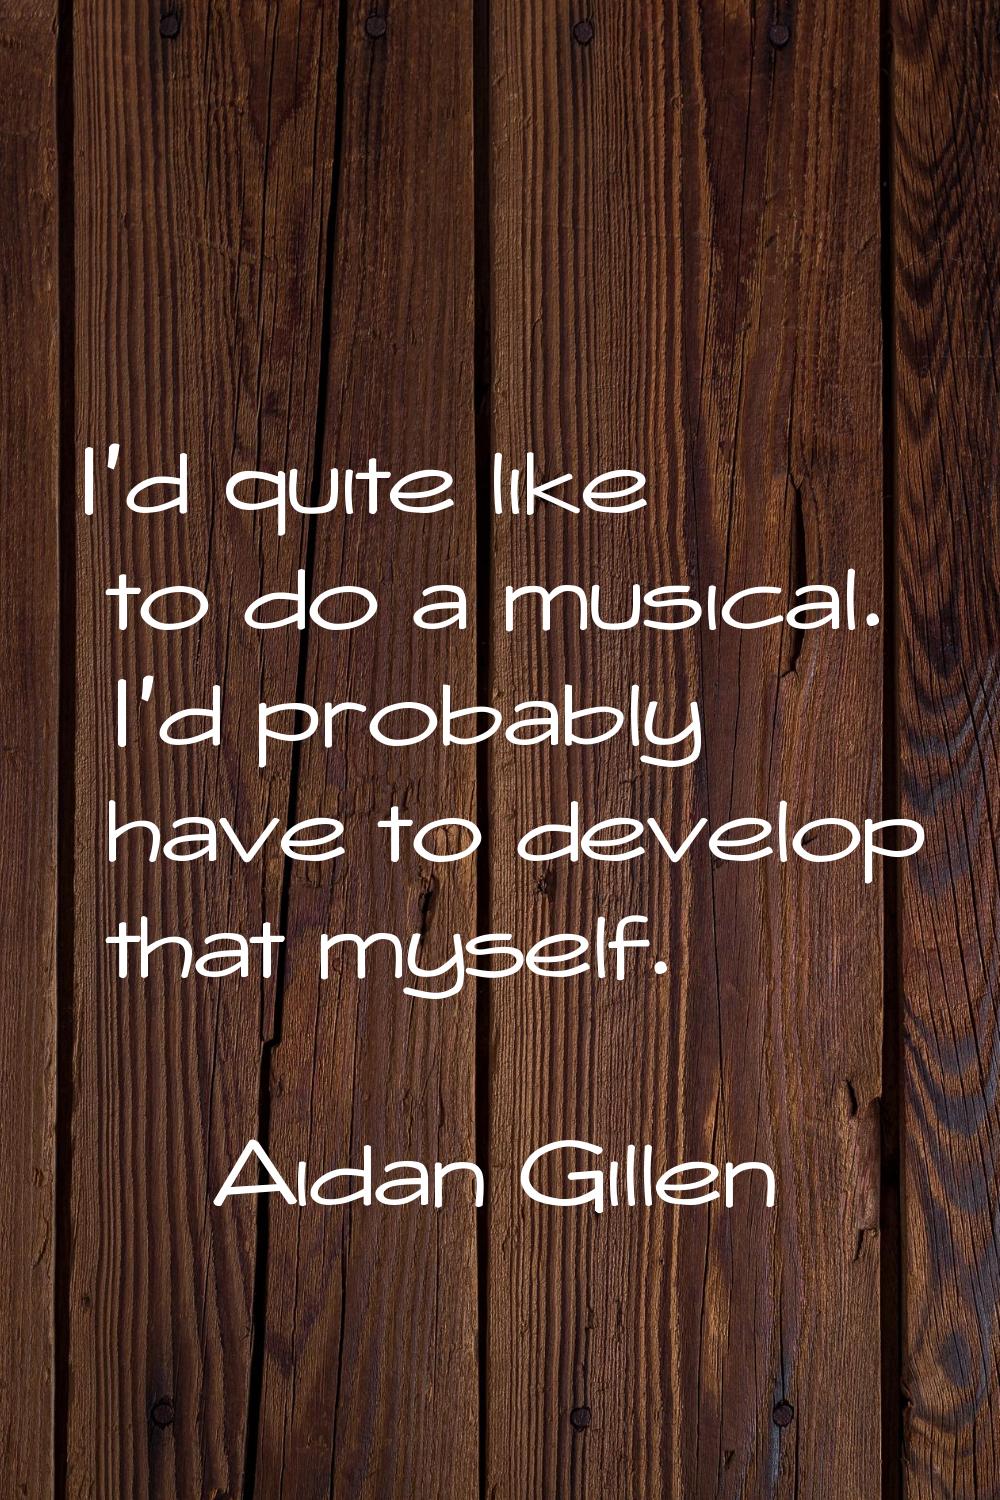 I'd quite like to do a musical. I'd probably have to develop that myself.